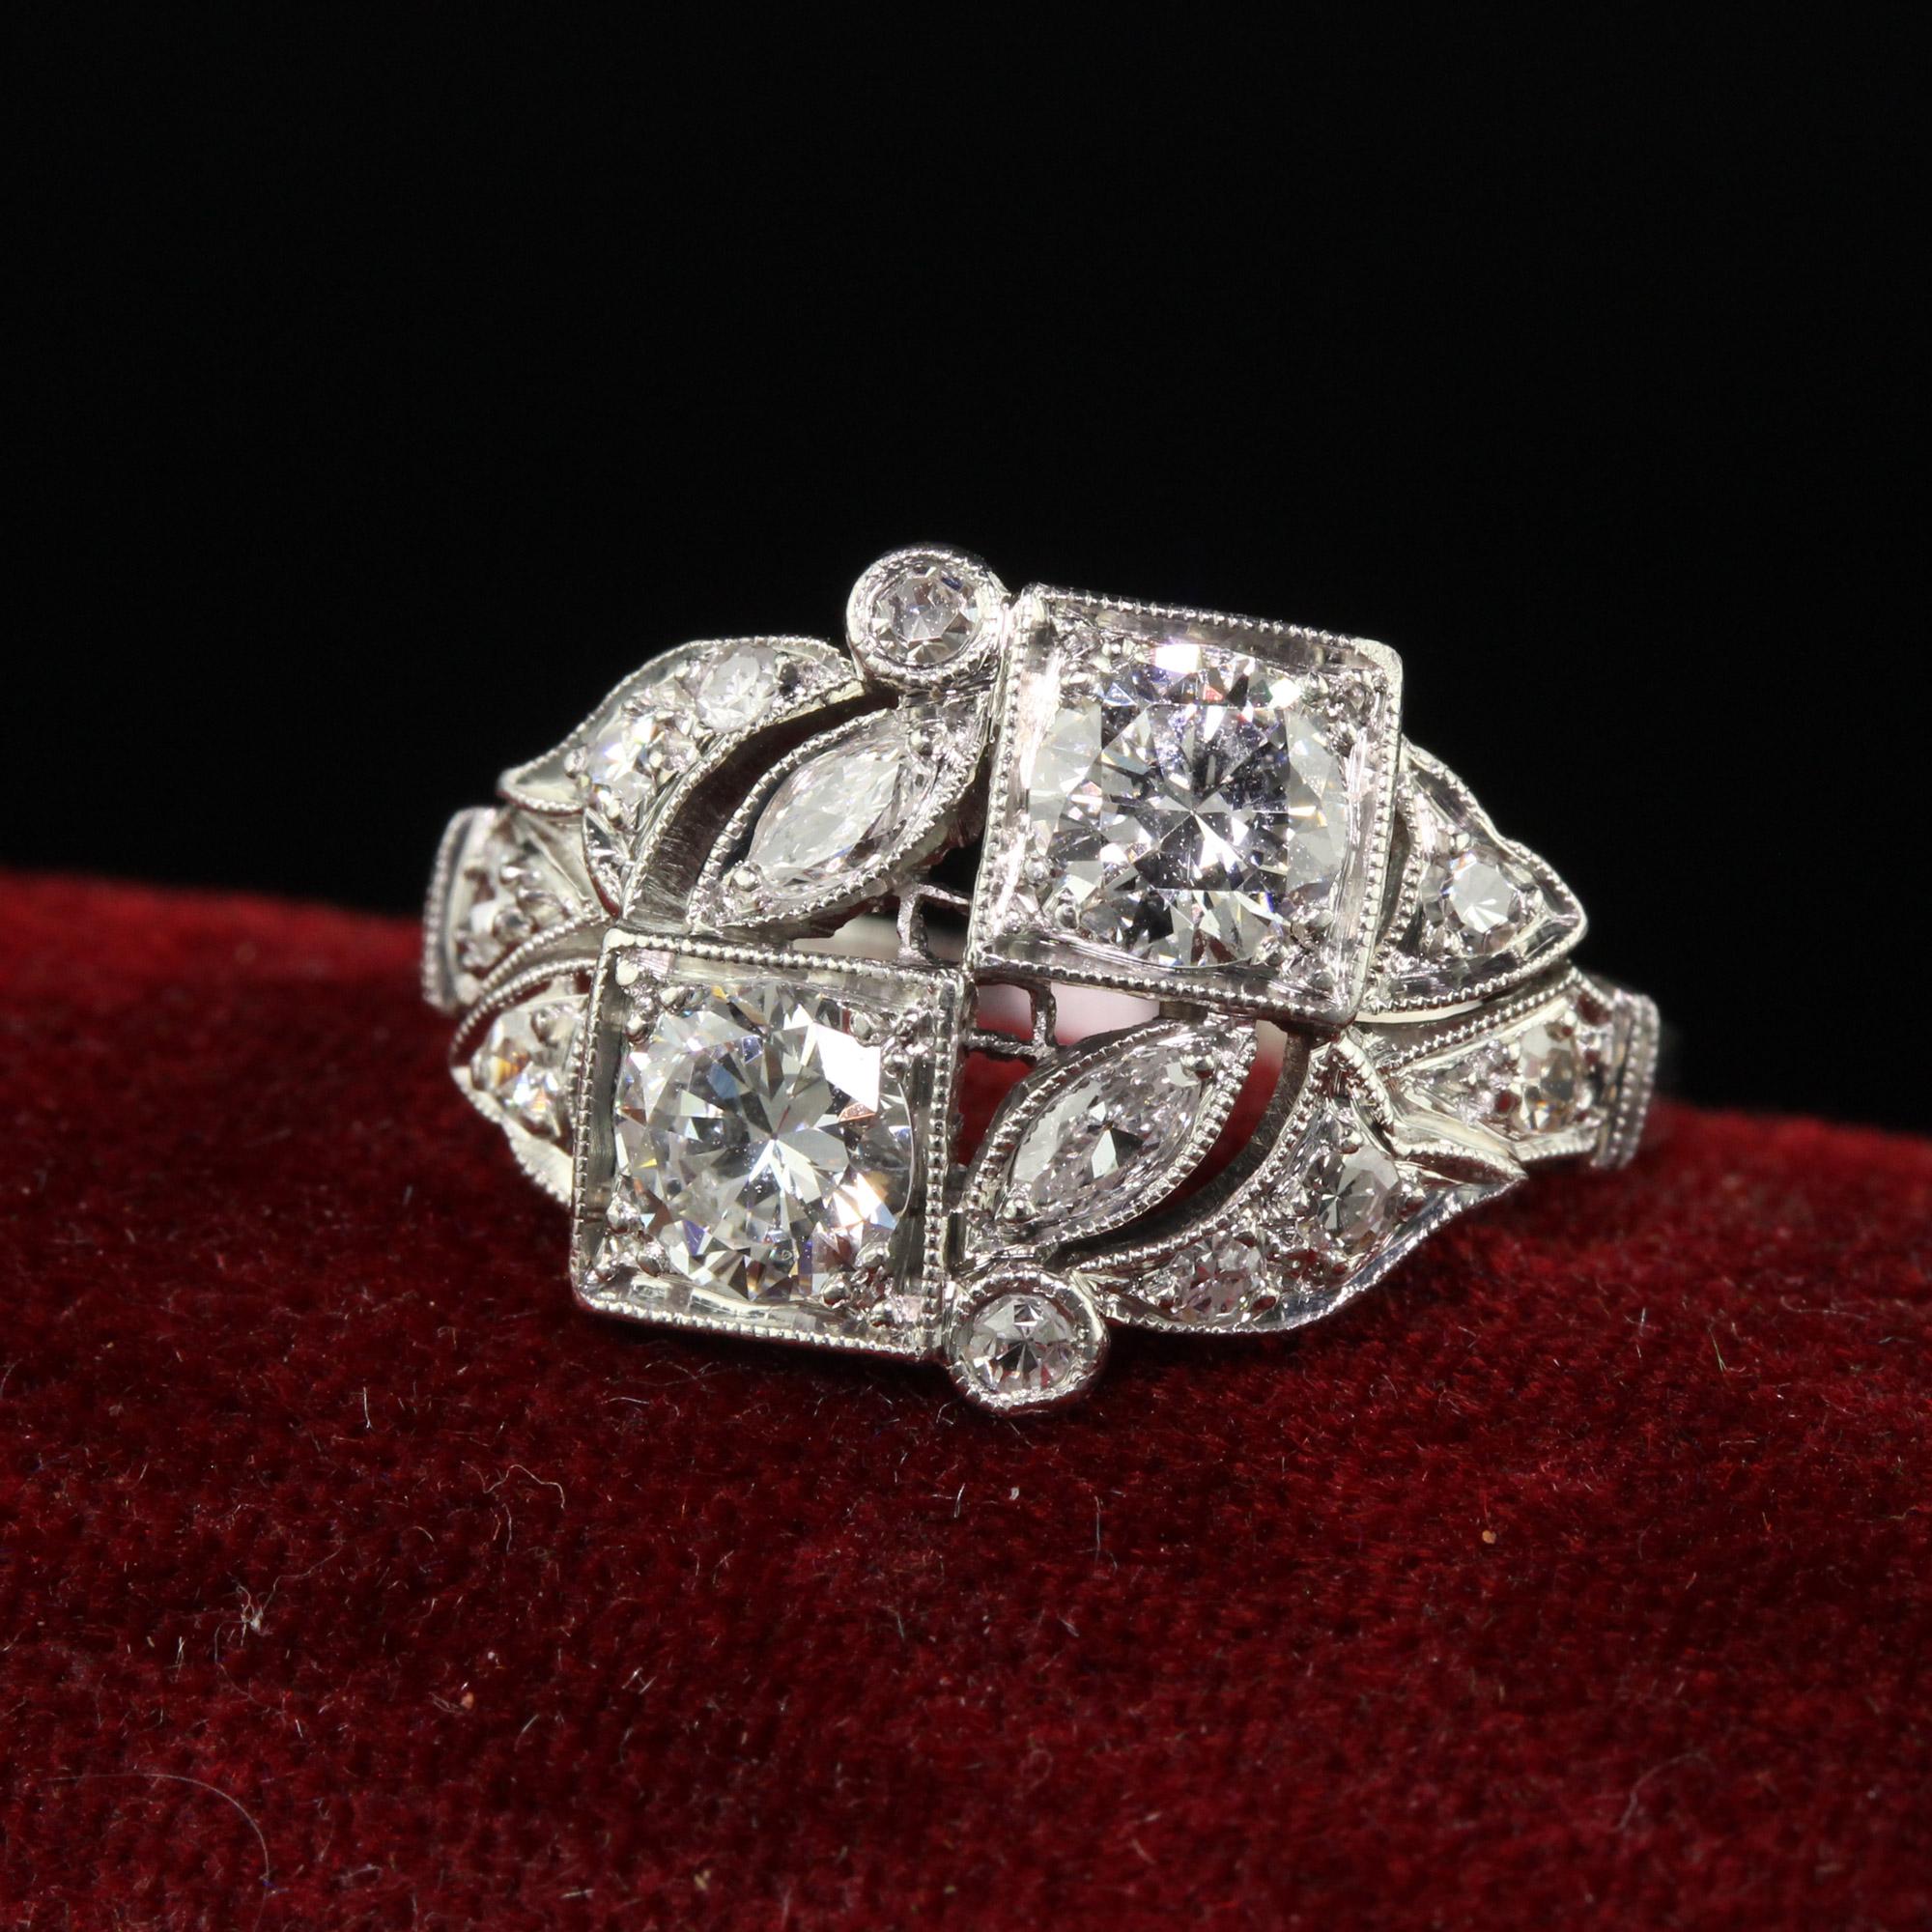 Beautiful Antique Art Deco Platinum Old European Diamond Filigree Toi et Moi Floral Ring. This incredible Art Deco ring is crafted in platinum. The ring has two old euro cut diamonds set diagonally on the ring with old cut marquise on either side.